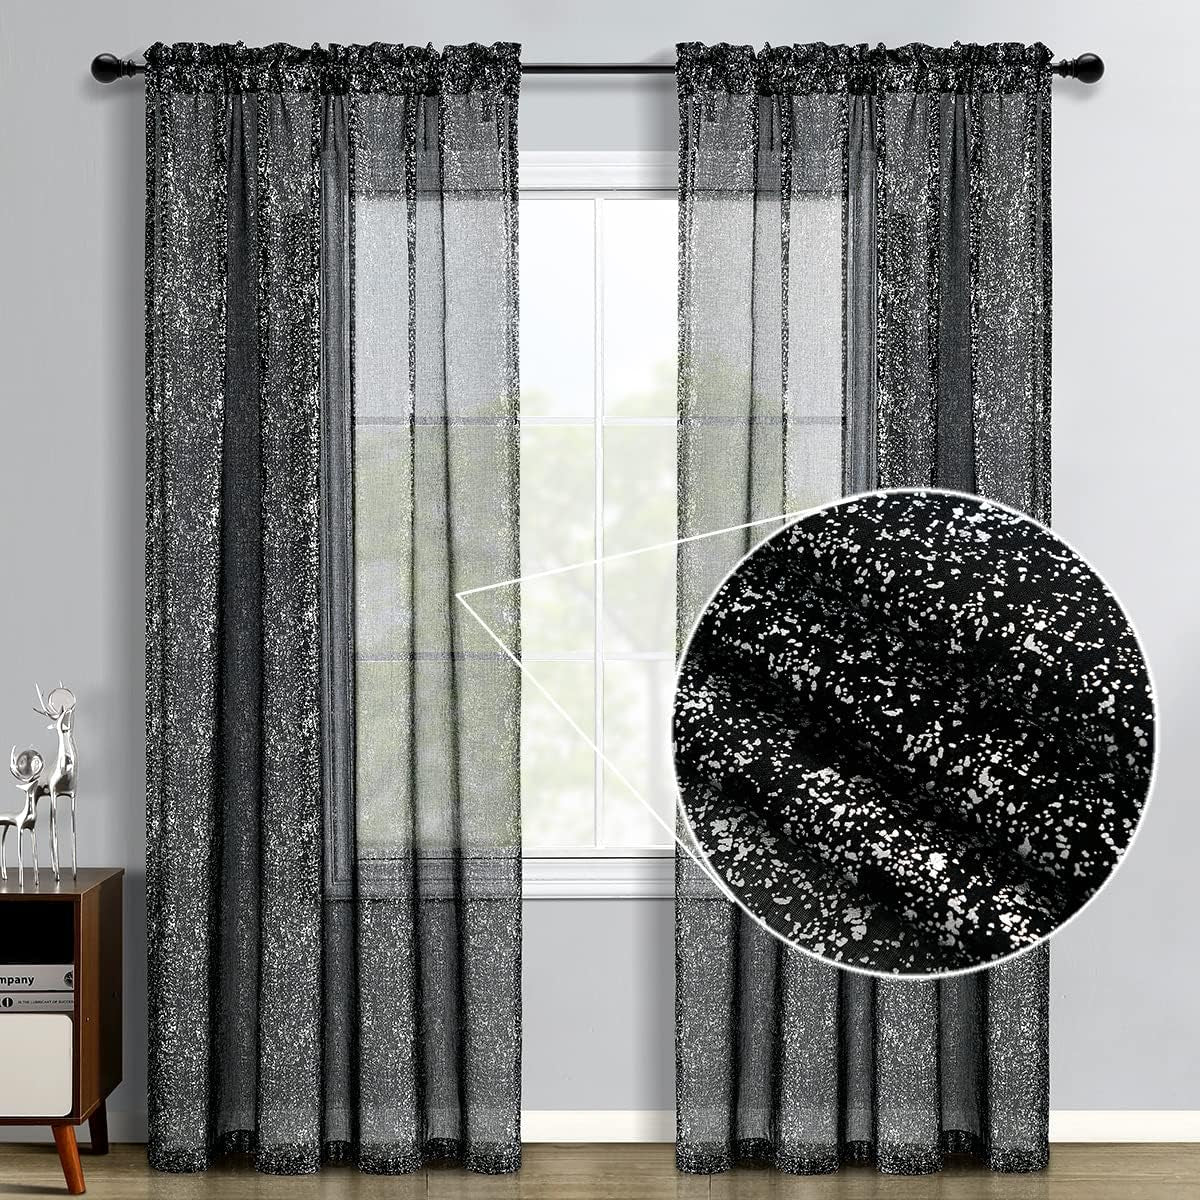 TERLYTEX Black and Silver Curtains 72 Inch Length - Metallic Silver Foil Spray Dots Glitter Sheer Curtains for Living Room, Privacy Sparkle Curtains for Windows, 52 X 72 Inch, 2 Panels, Black Silver  TERLYTEX   